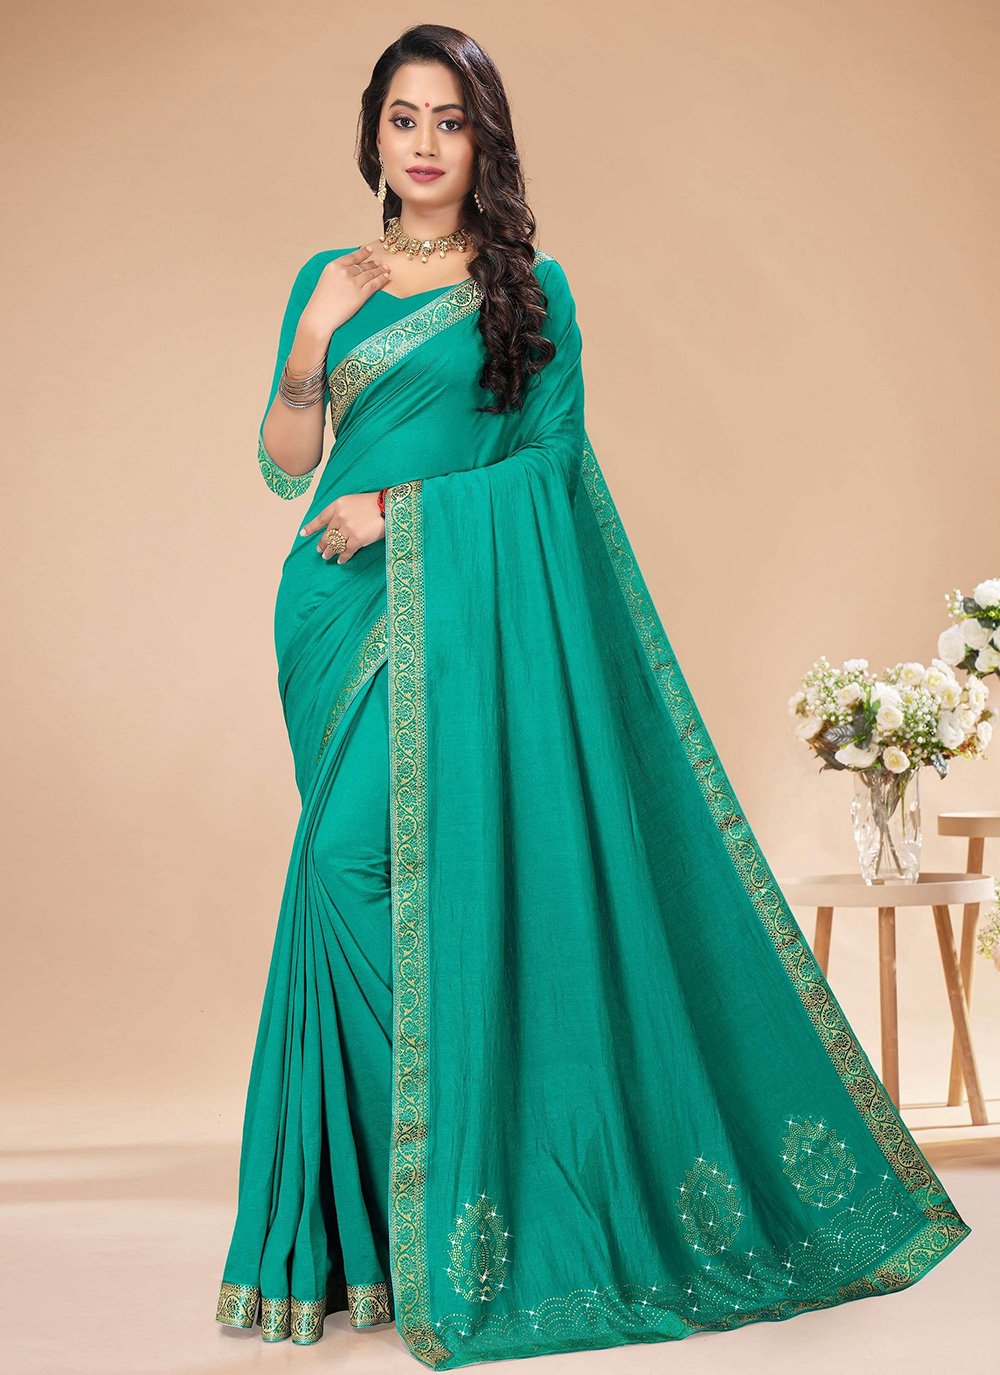 Vichitra Silk Lace Traditional Saree in Turquoise